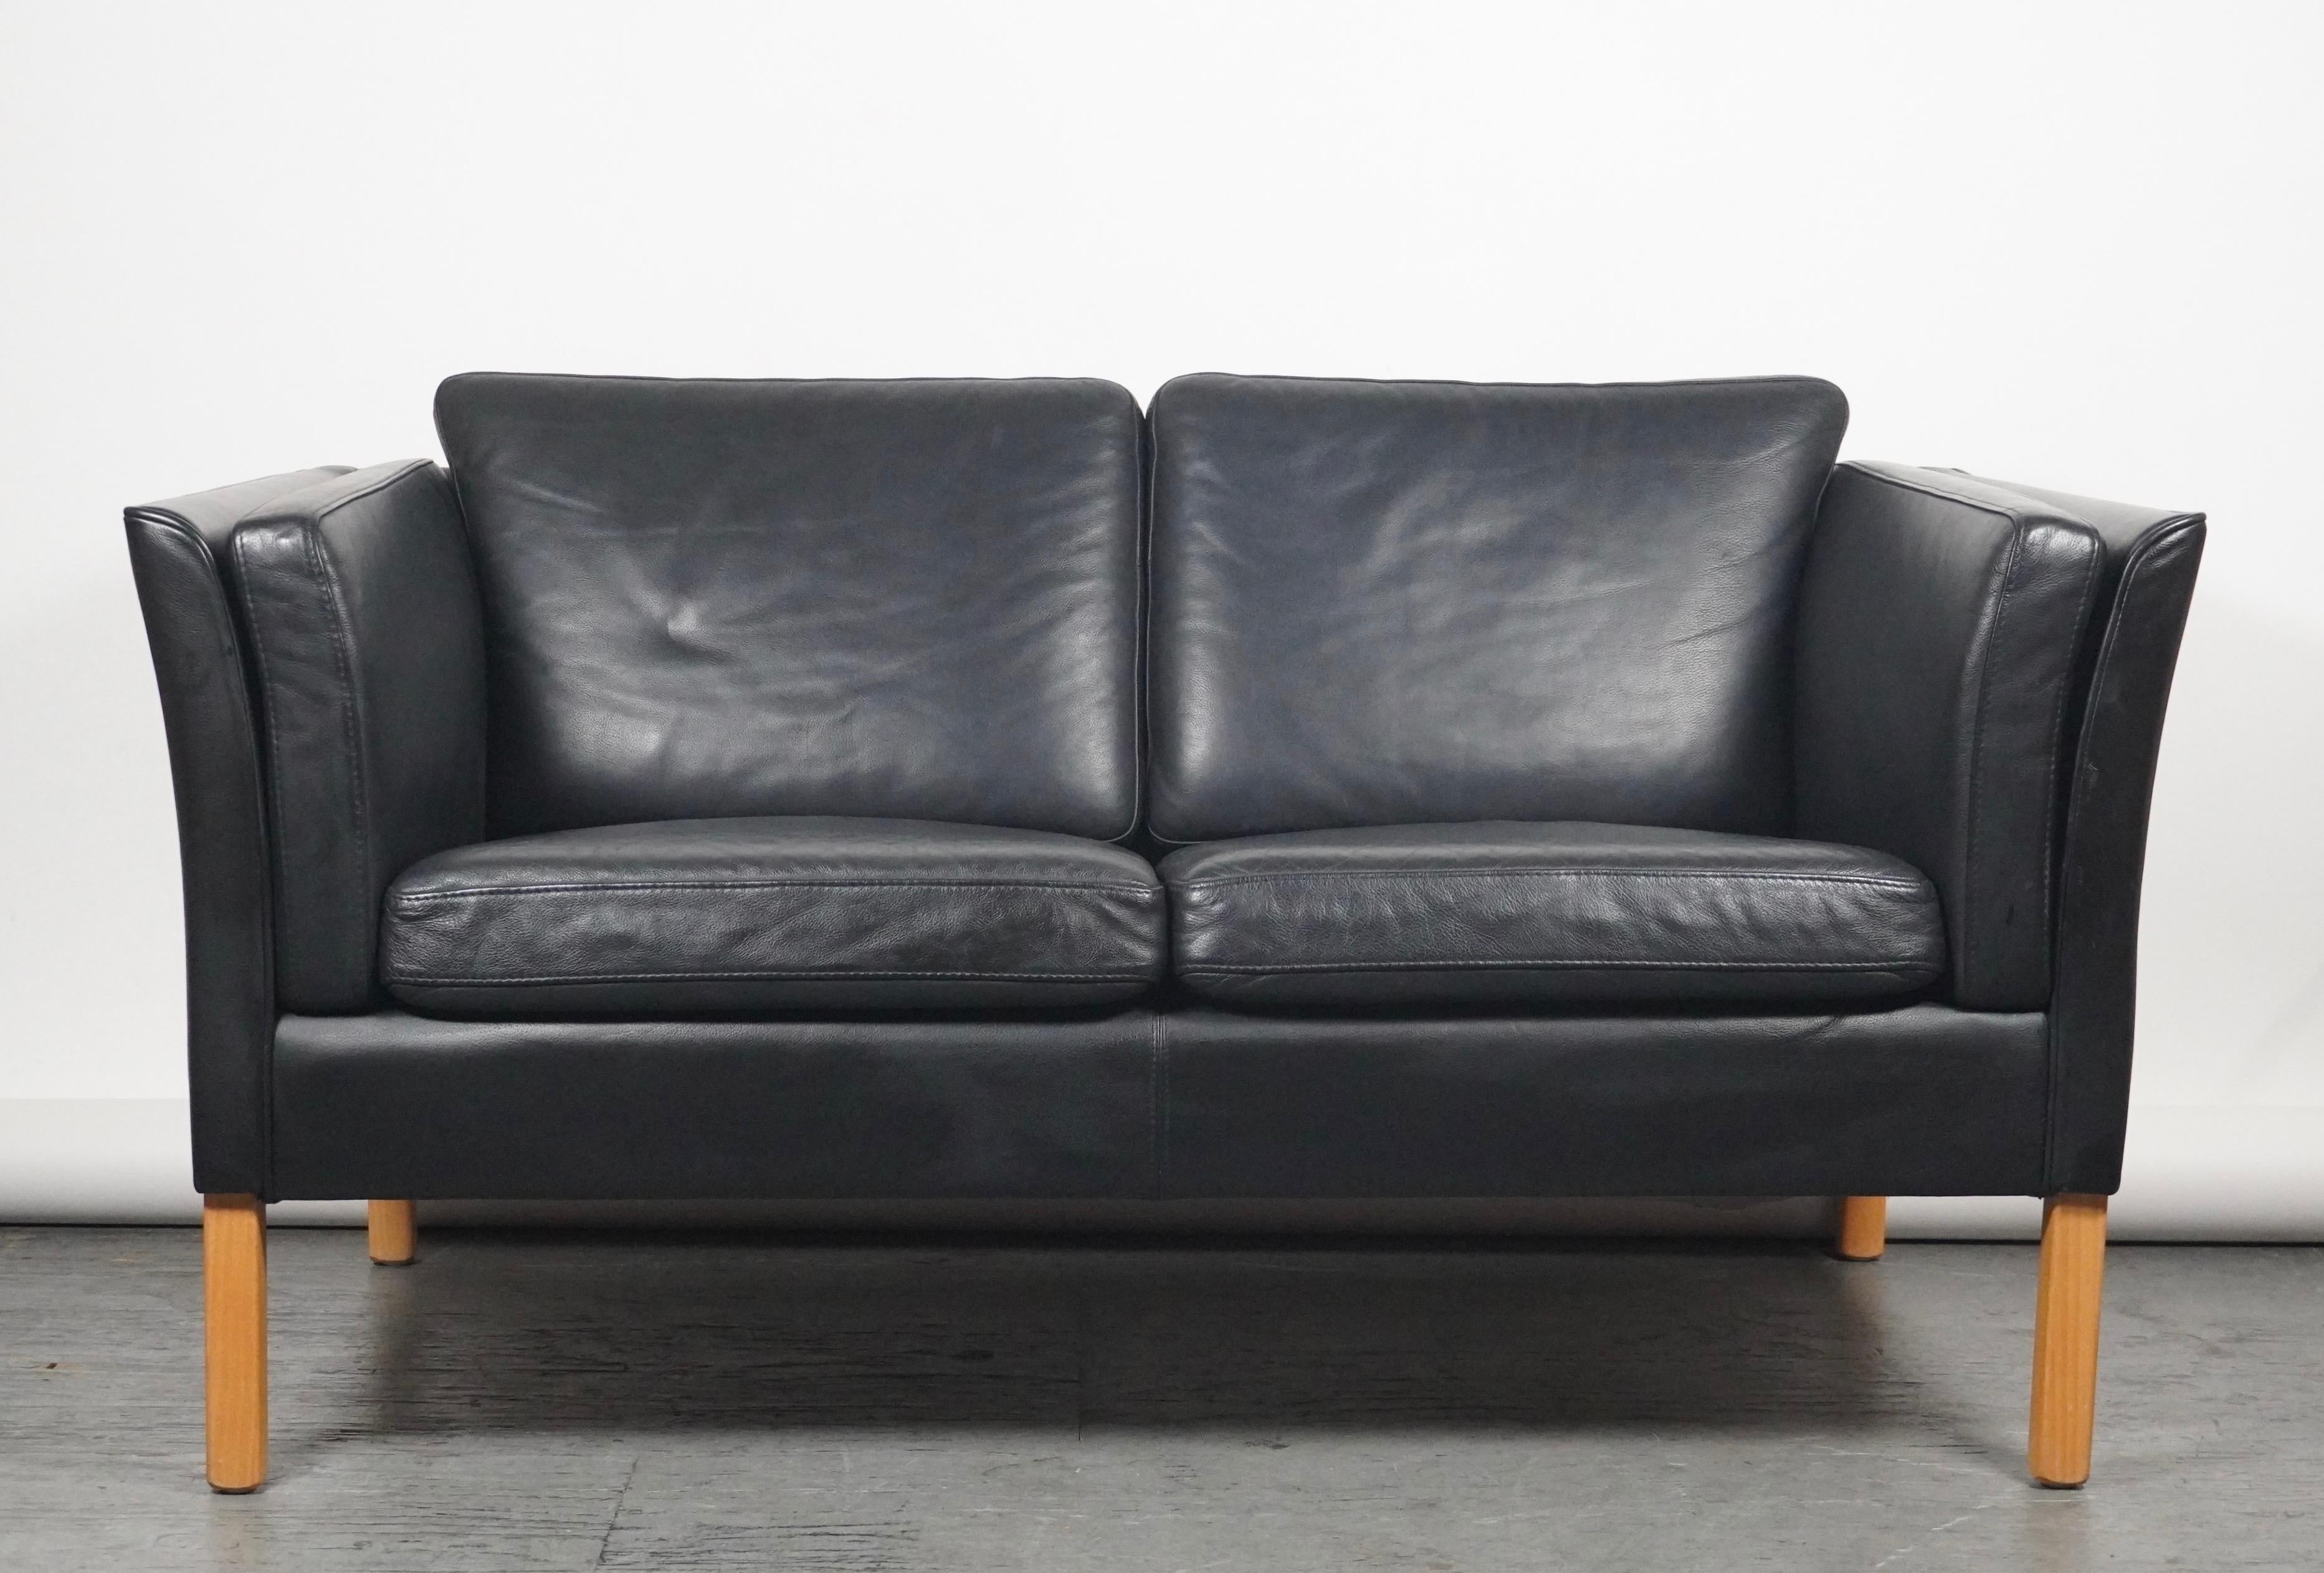 Black leather settee in the style of Borge Mogensen by Stouby of Denmark who are known for their quality made furniture and are considered second only to Fredericia, who produced the actual design. Gently curved arms with square beech legs and black